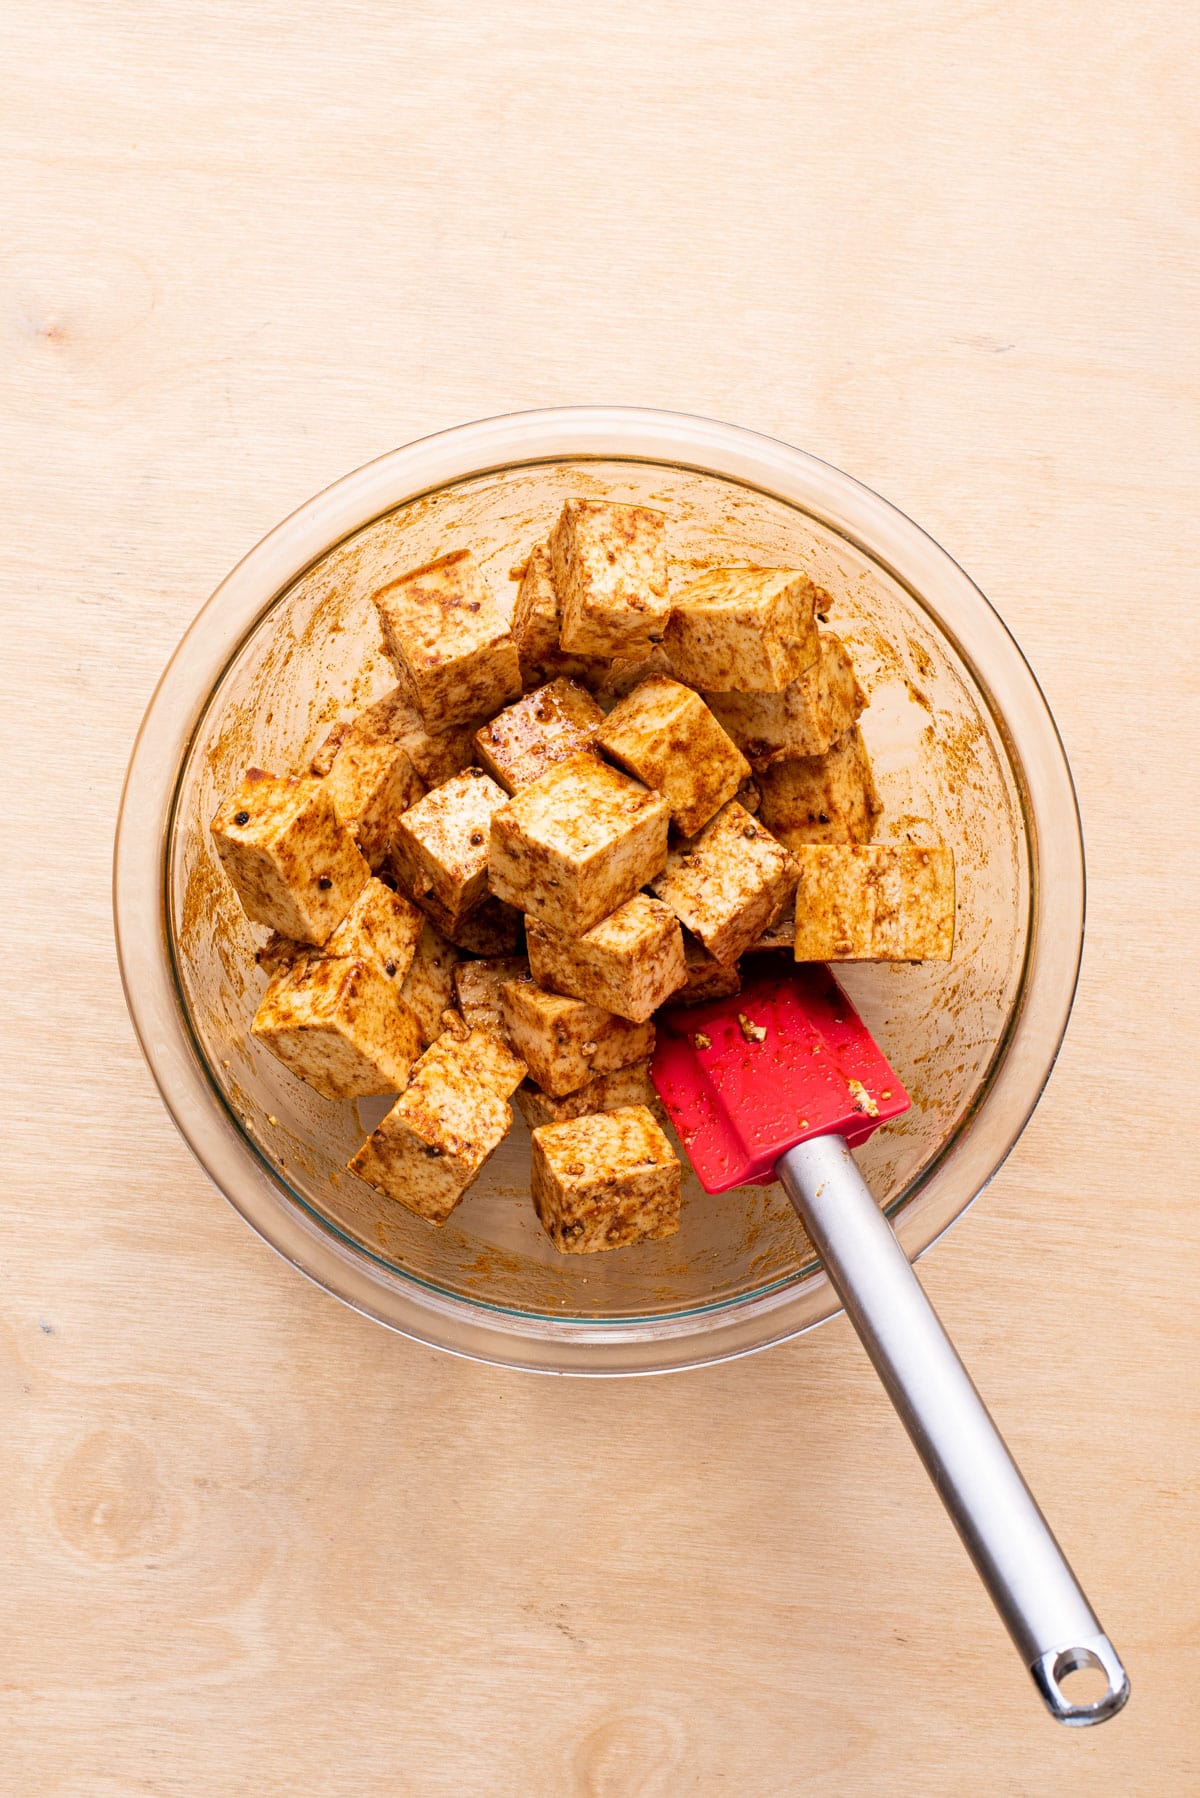 Marinating tofu cubes in a glass bowl.